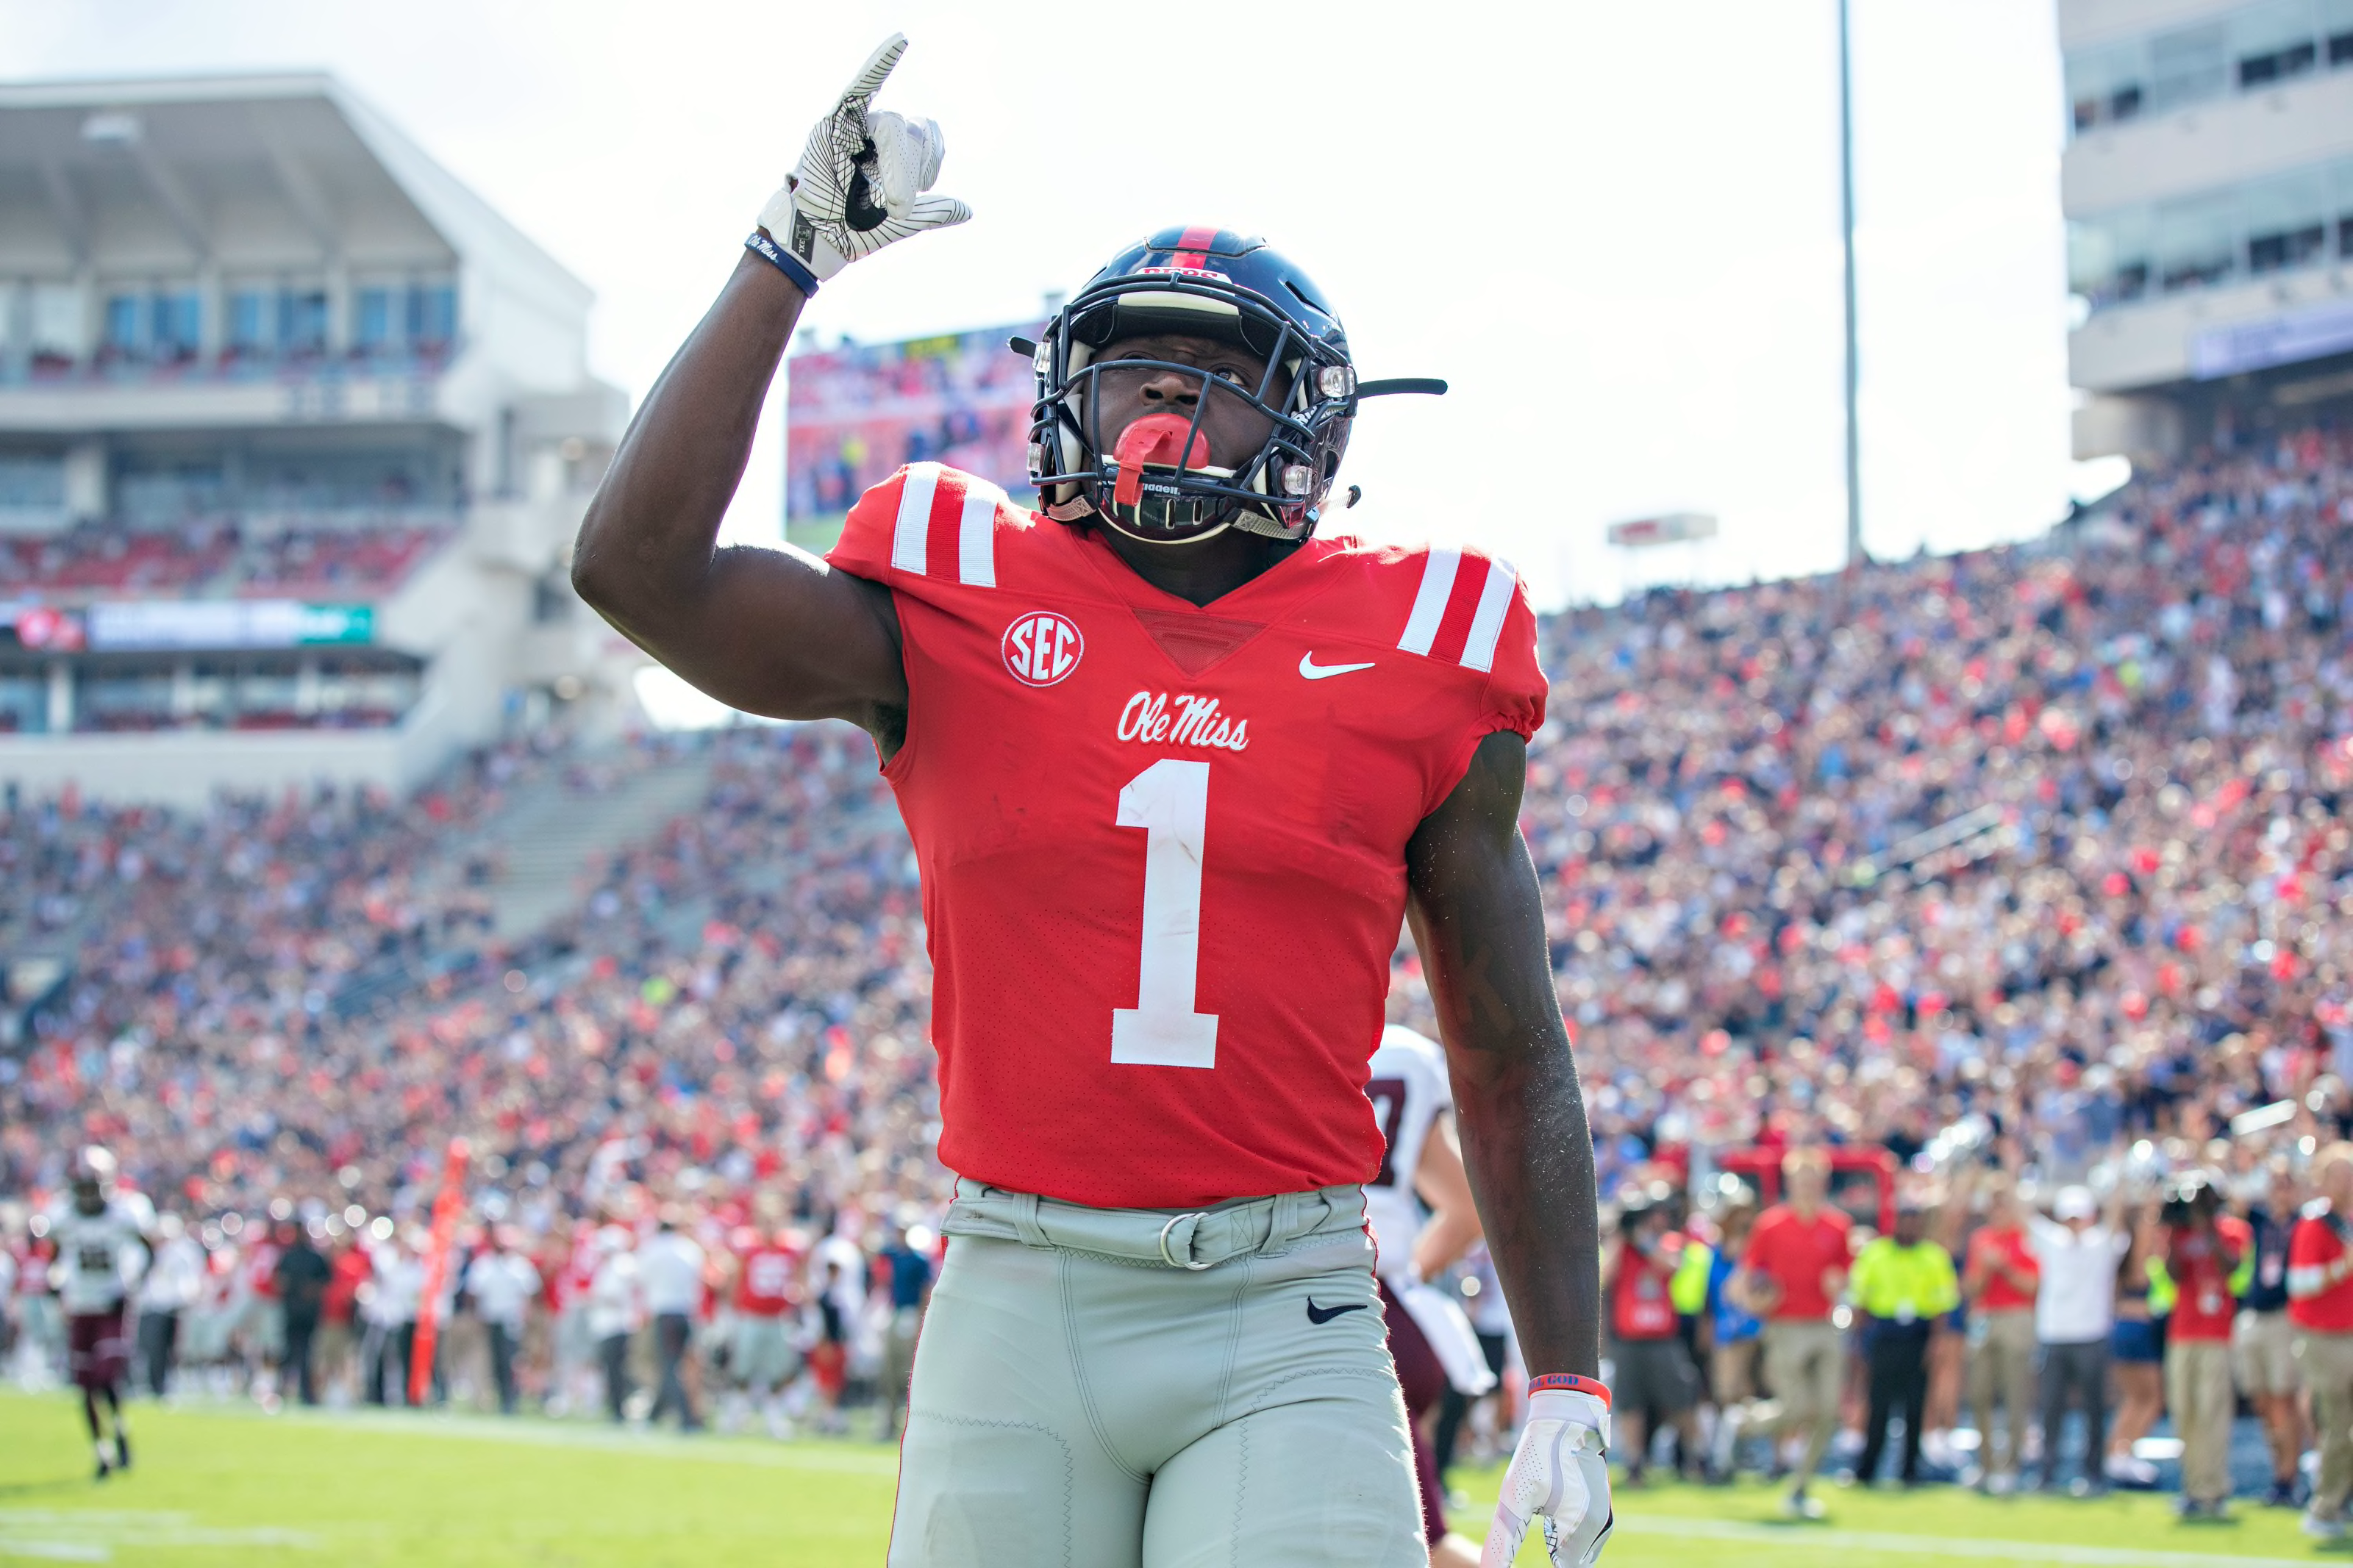 Ole Miss football duels LSU in a southern affair